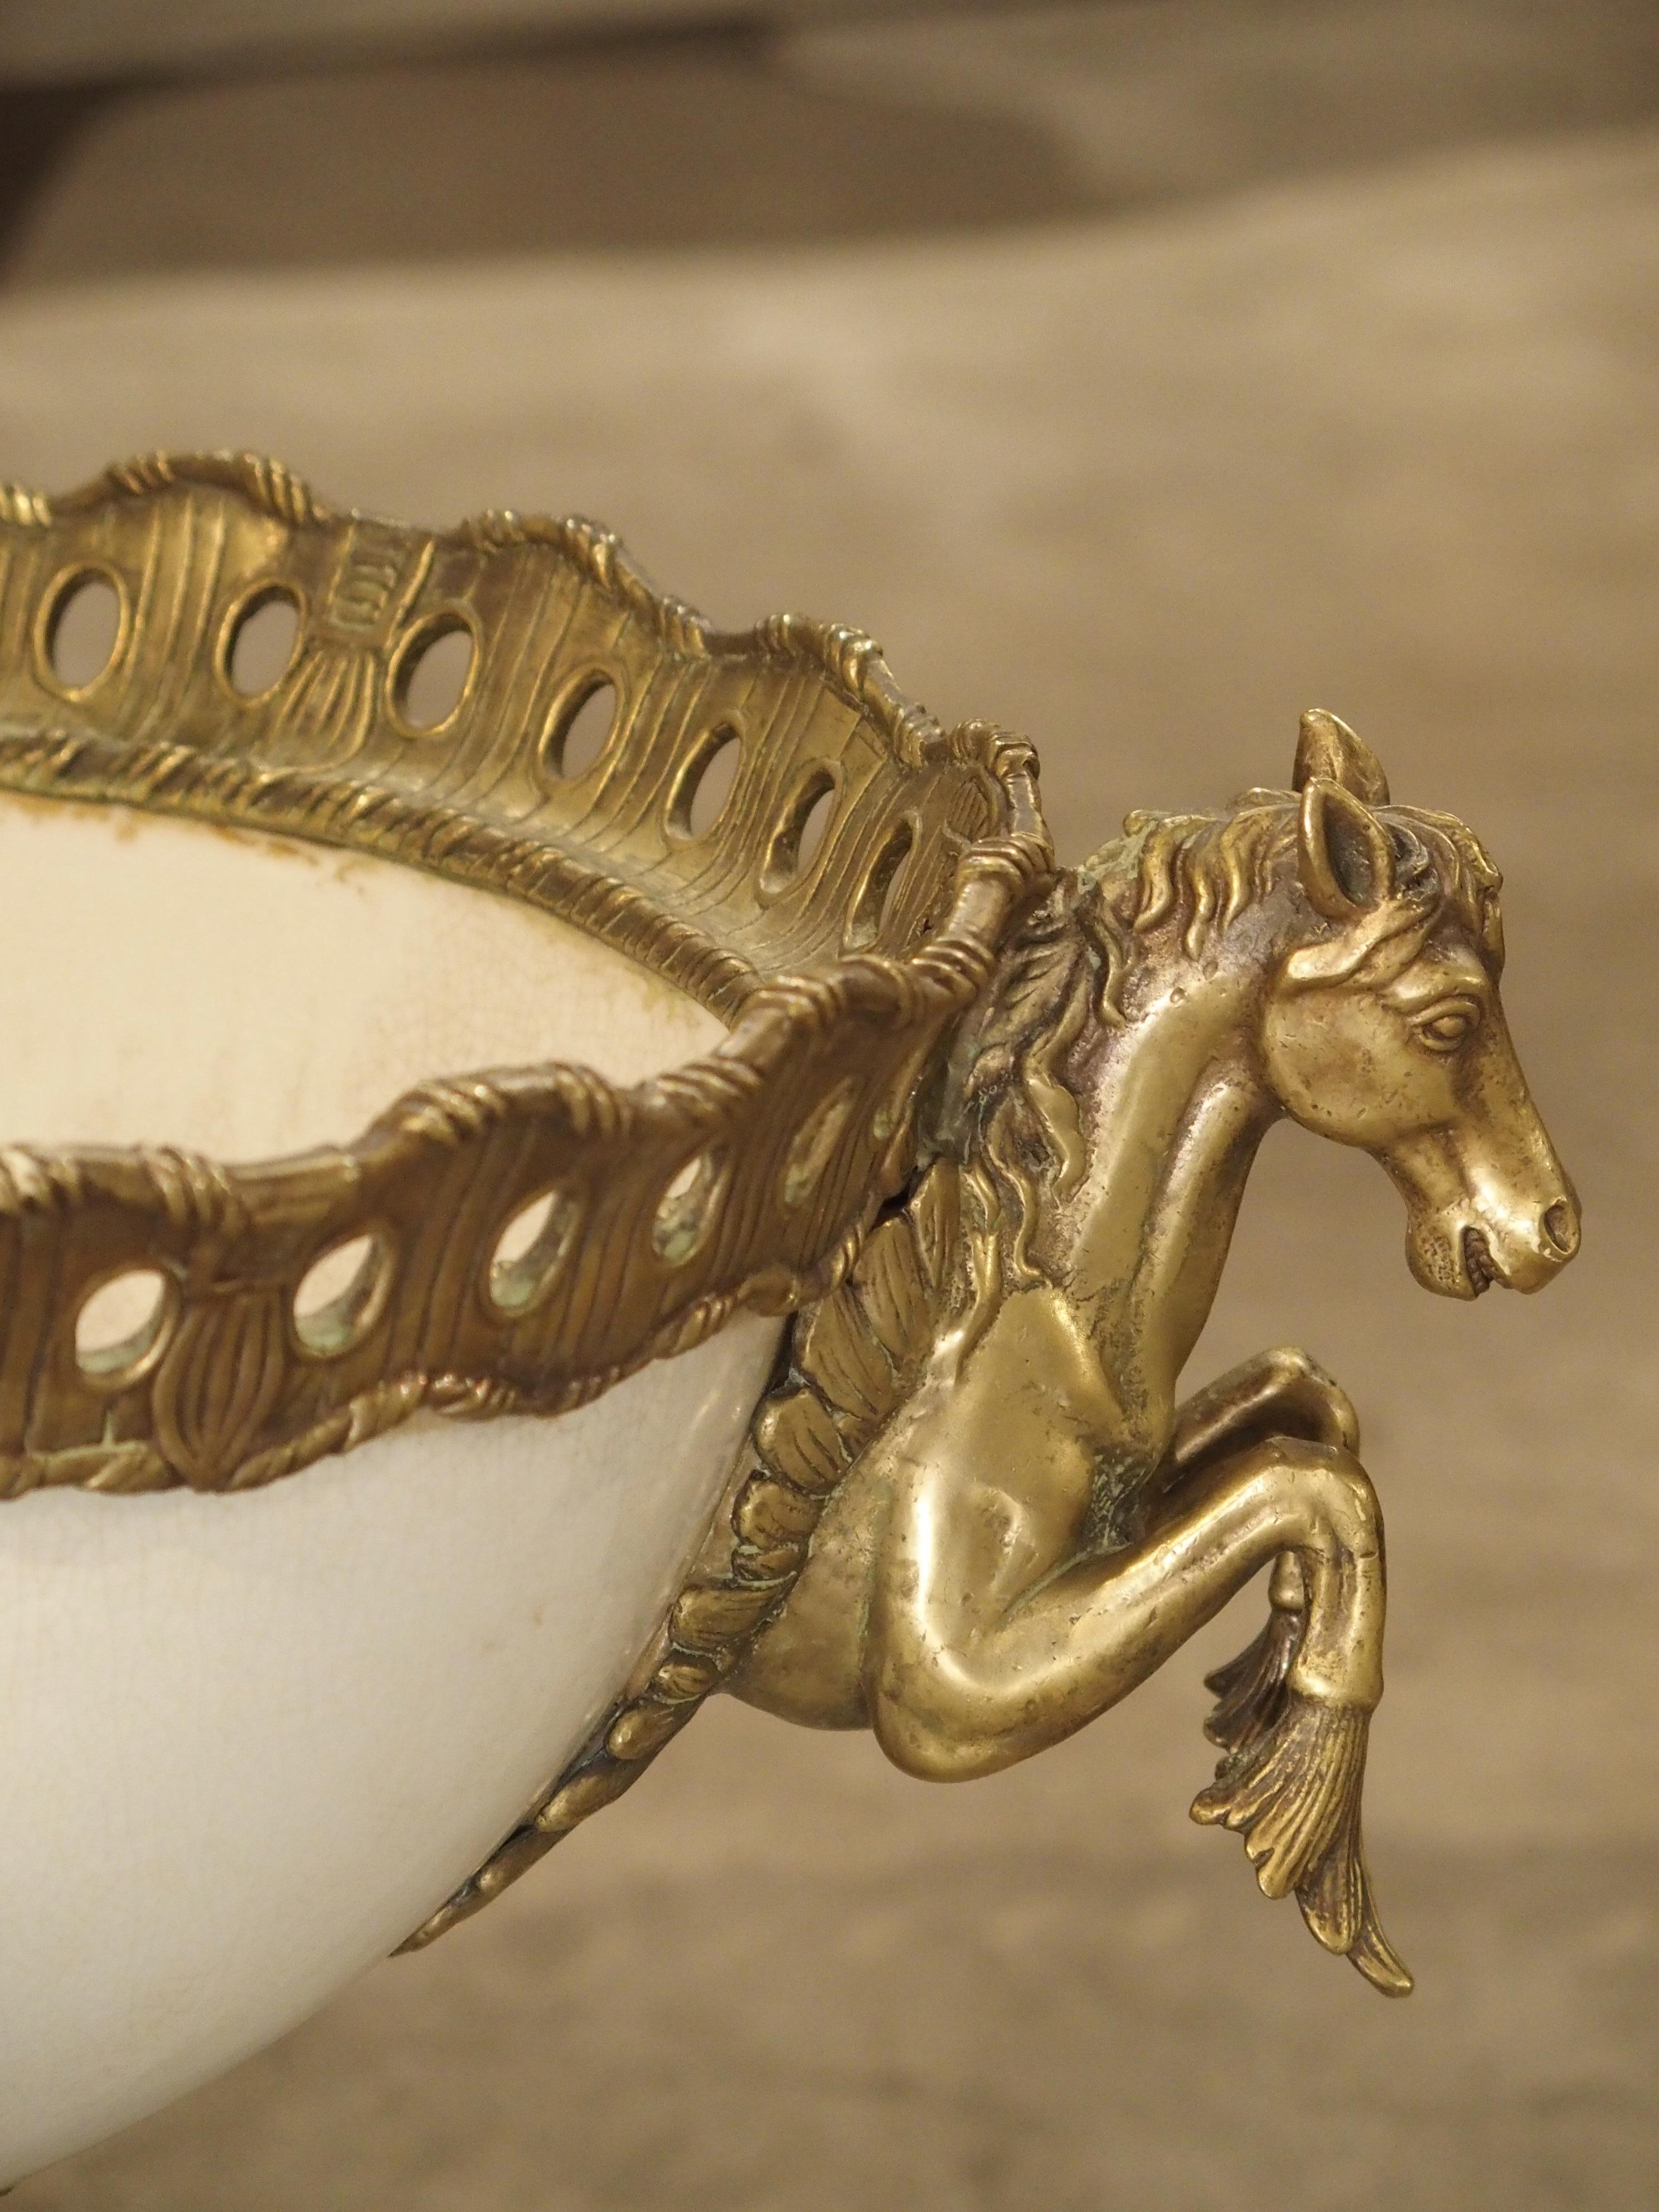 French White Faience Urn with Gilt Bronze-Mounted Horses from France, circa 1900